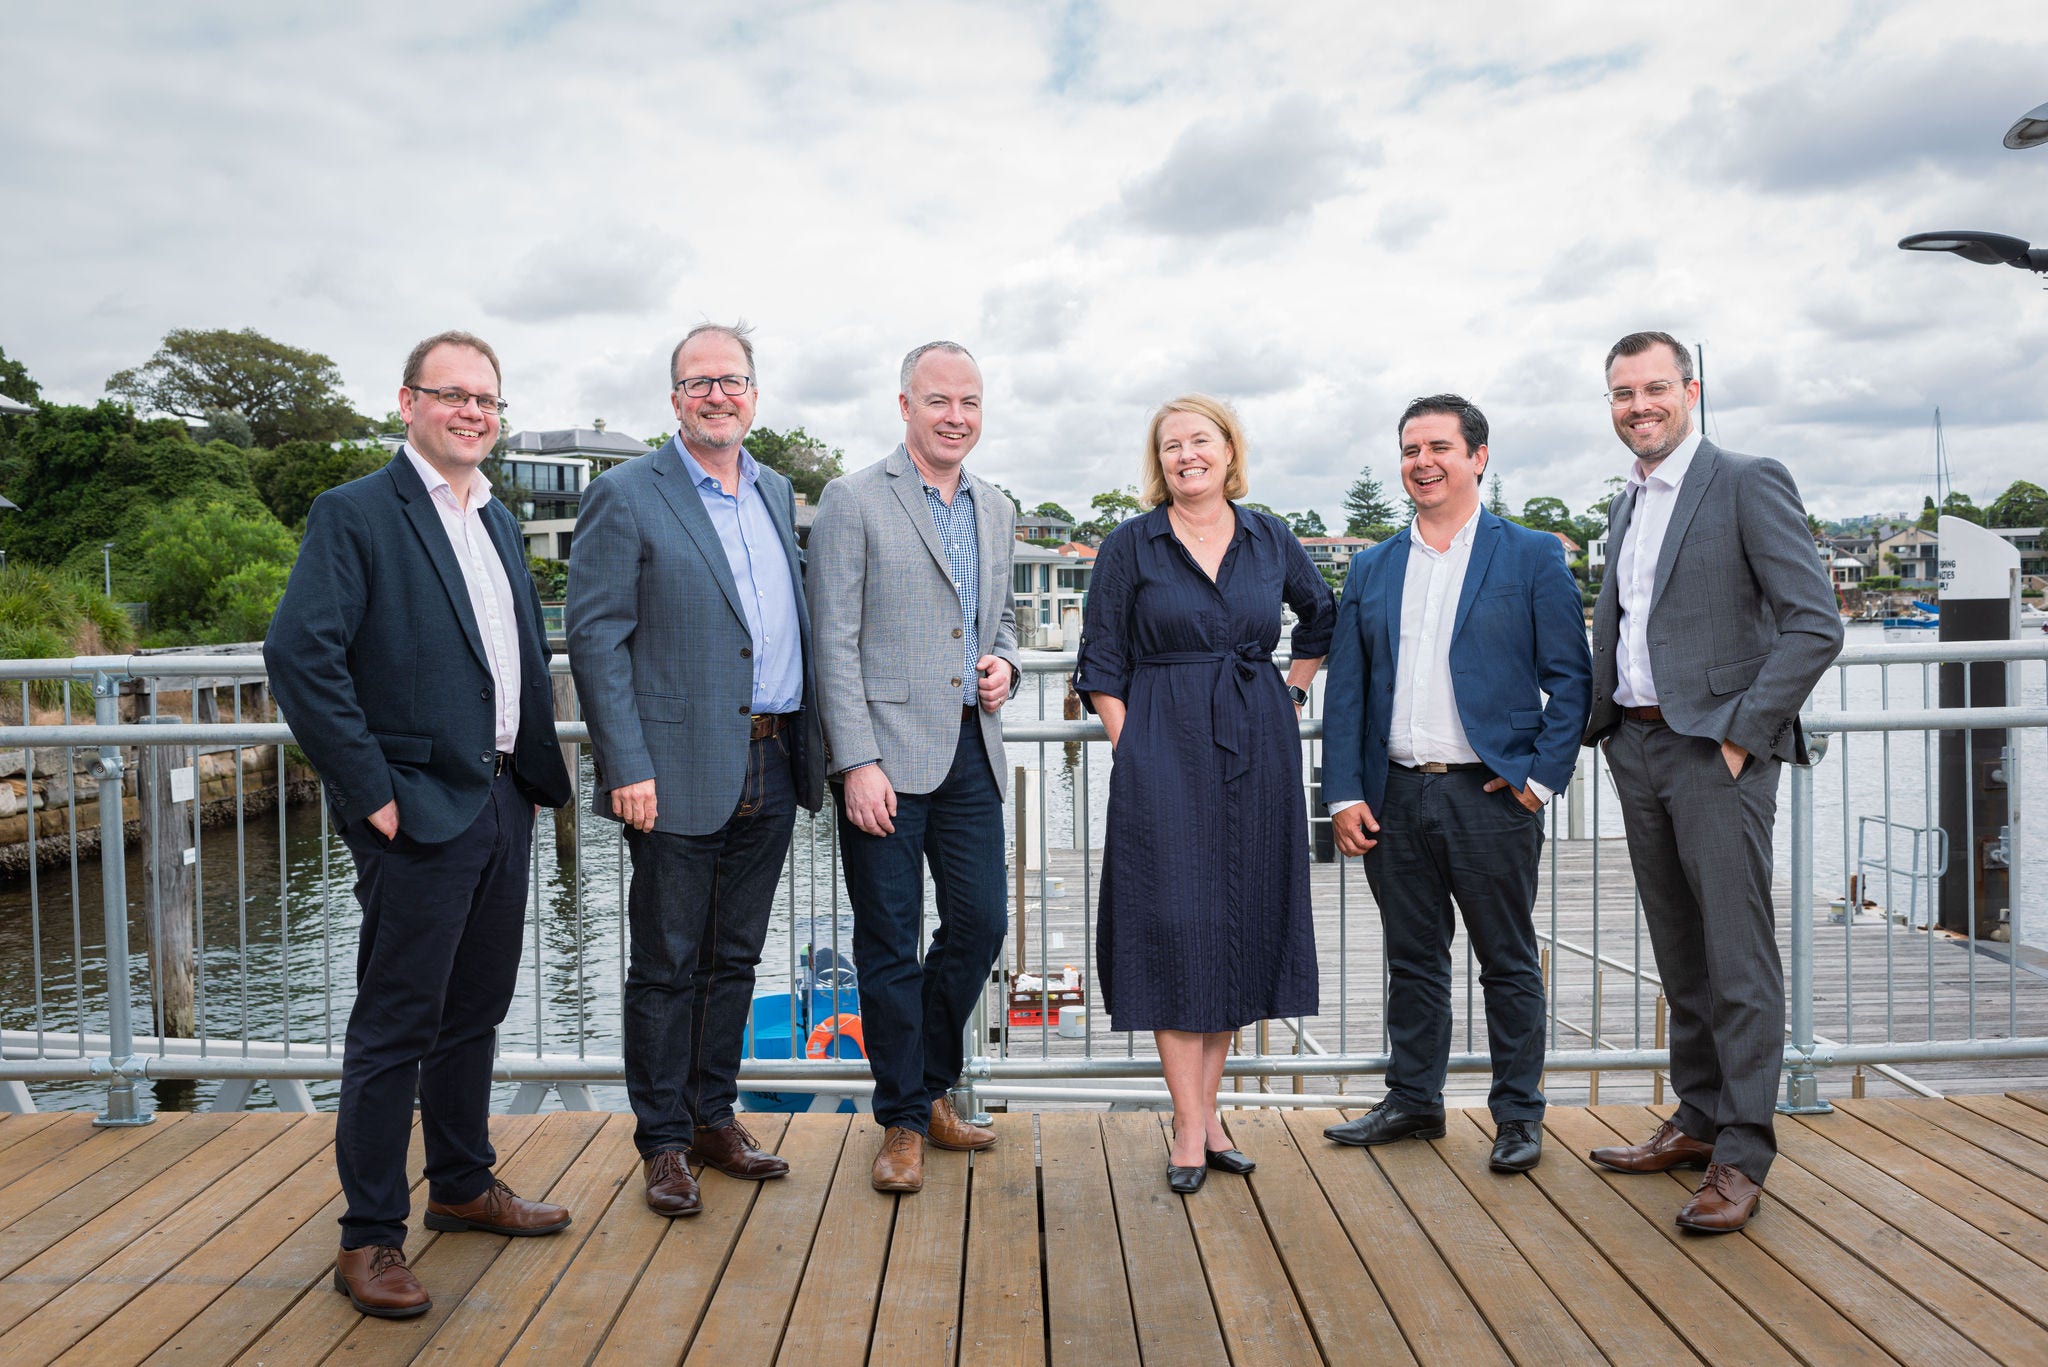 Six professionals dressed in corporate attire, smiling on a wharf on a cloudy day.